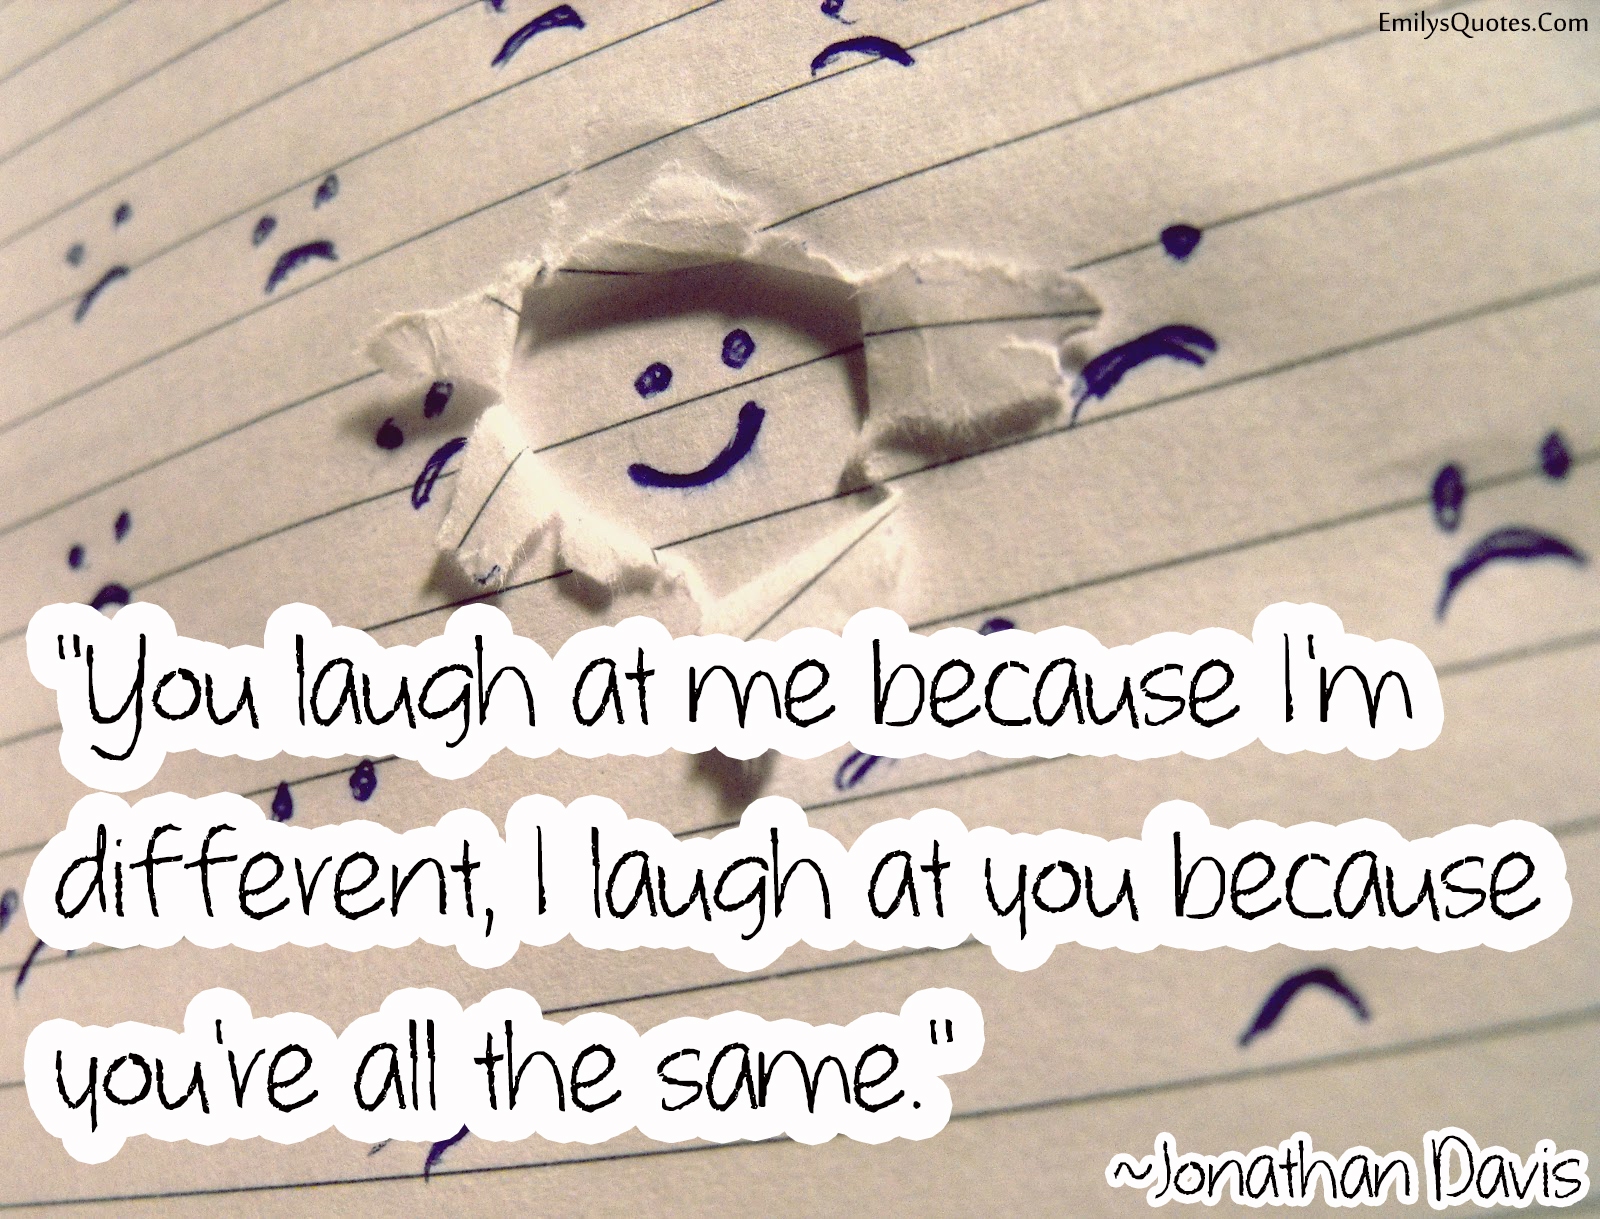 You laugh at me because I’m different, I laugh at you because you’re all the same